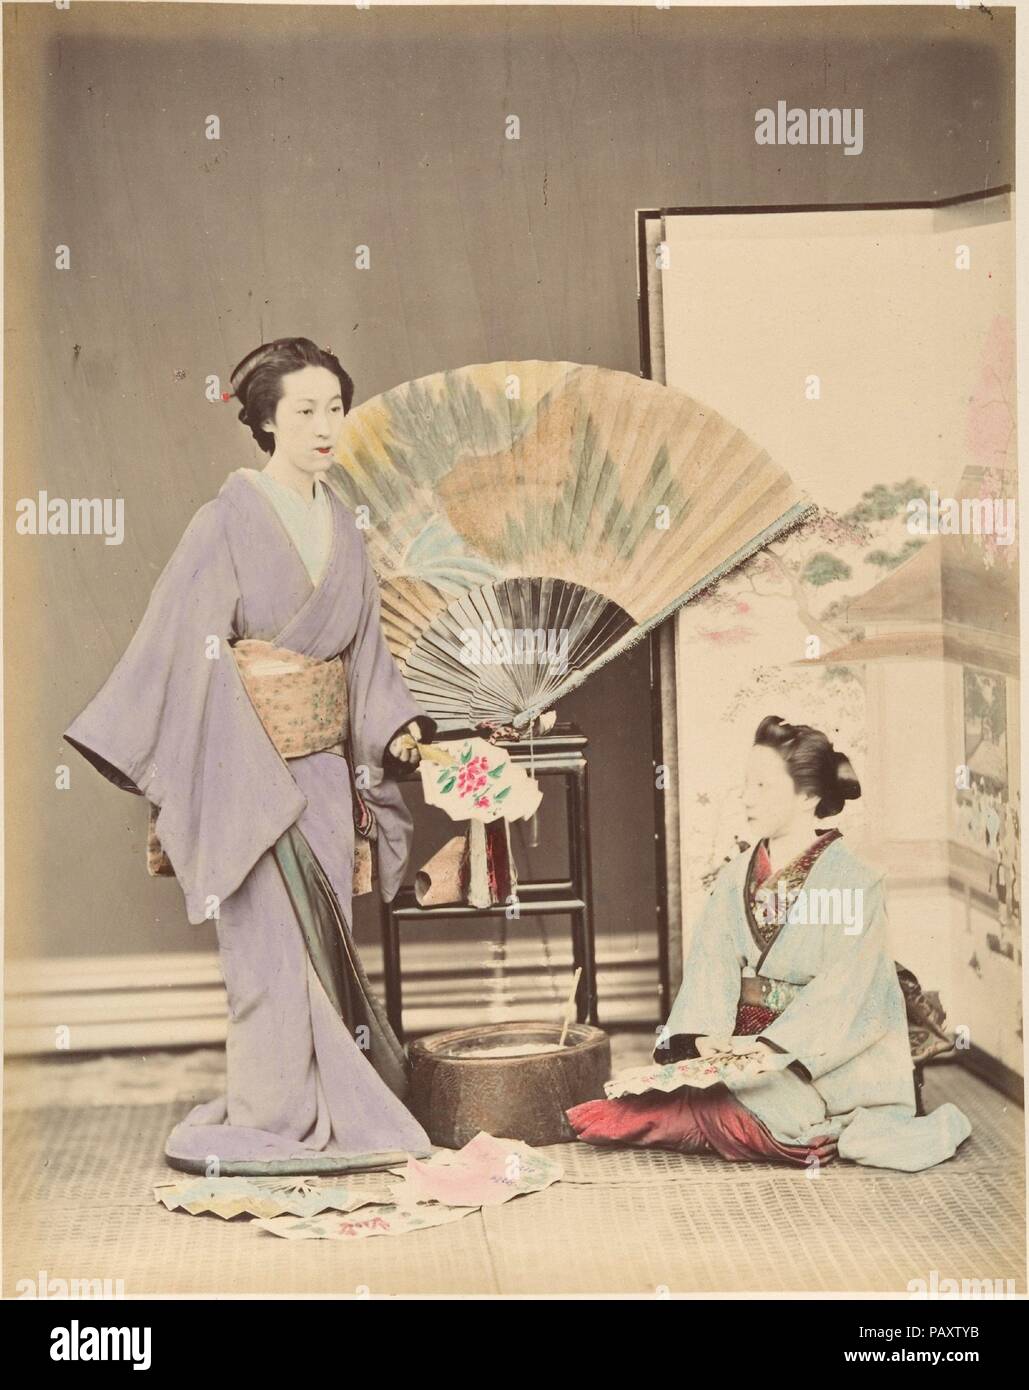 [Two Japanese Women in Traditional Dress with Fan and Screen]. Artist: Suzuki Shin'ichi (Japanese, 1835-1919). Dimensions: 25.2 x 19.7 cm (9 15/16 x 7 3/4 in.). Date: 1870s. Museum: Metropolitan Museum of Art, New York, USA. Stock Photo